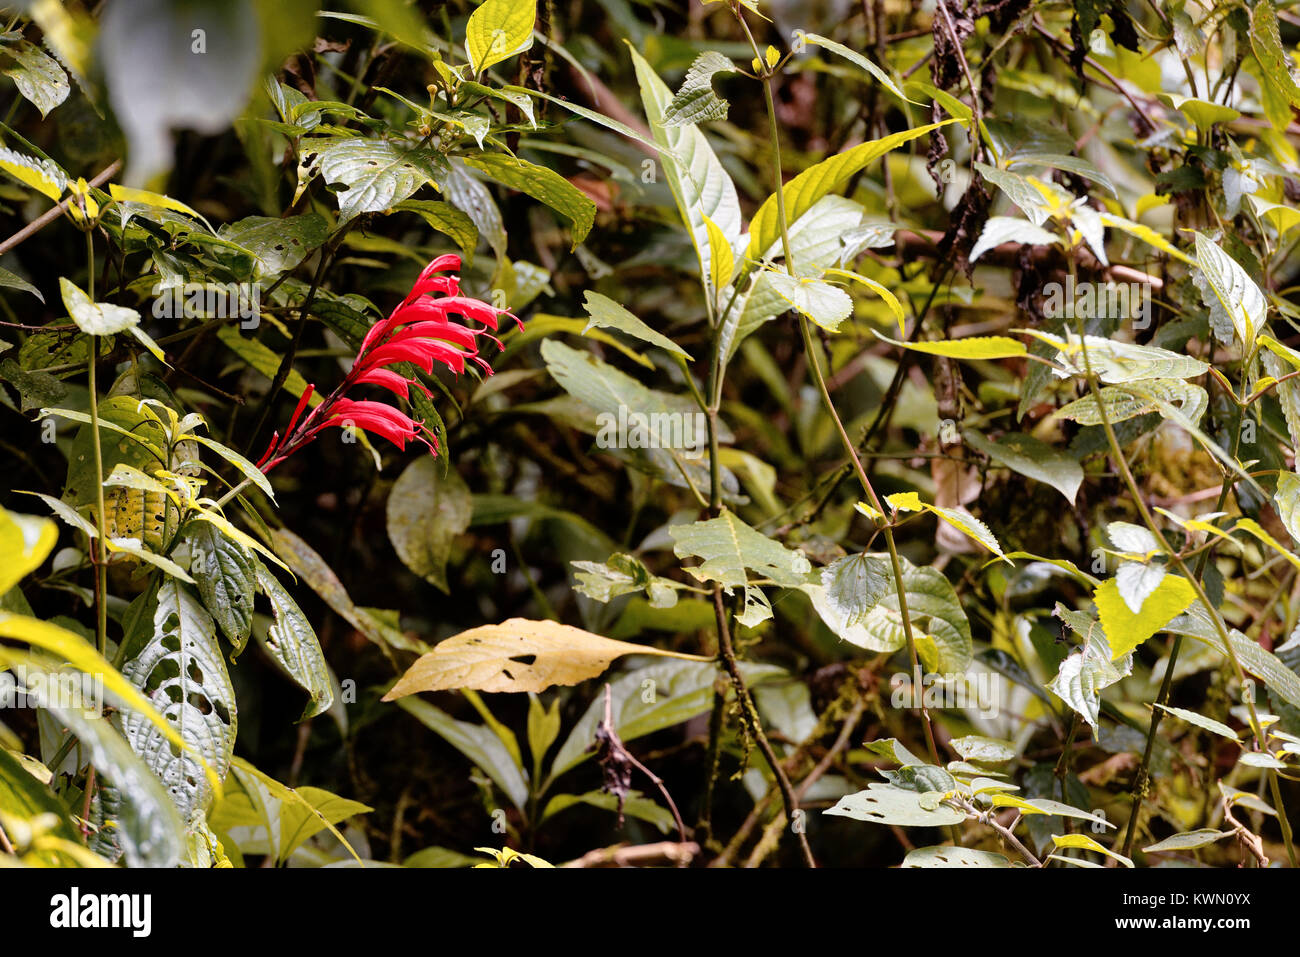 Long red petals on a flower in the green on the Monteverde cloud forest, Costa Rica Stock Photo